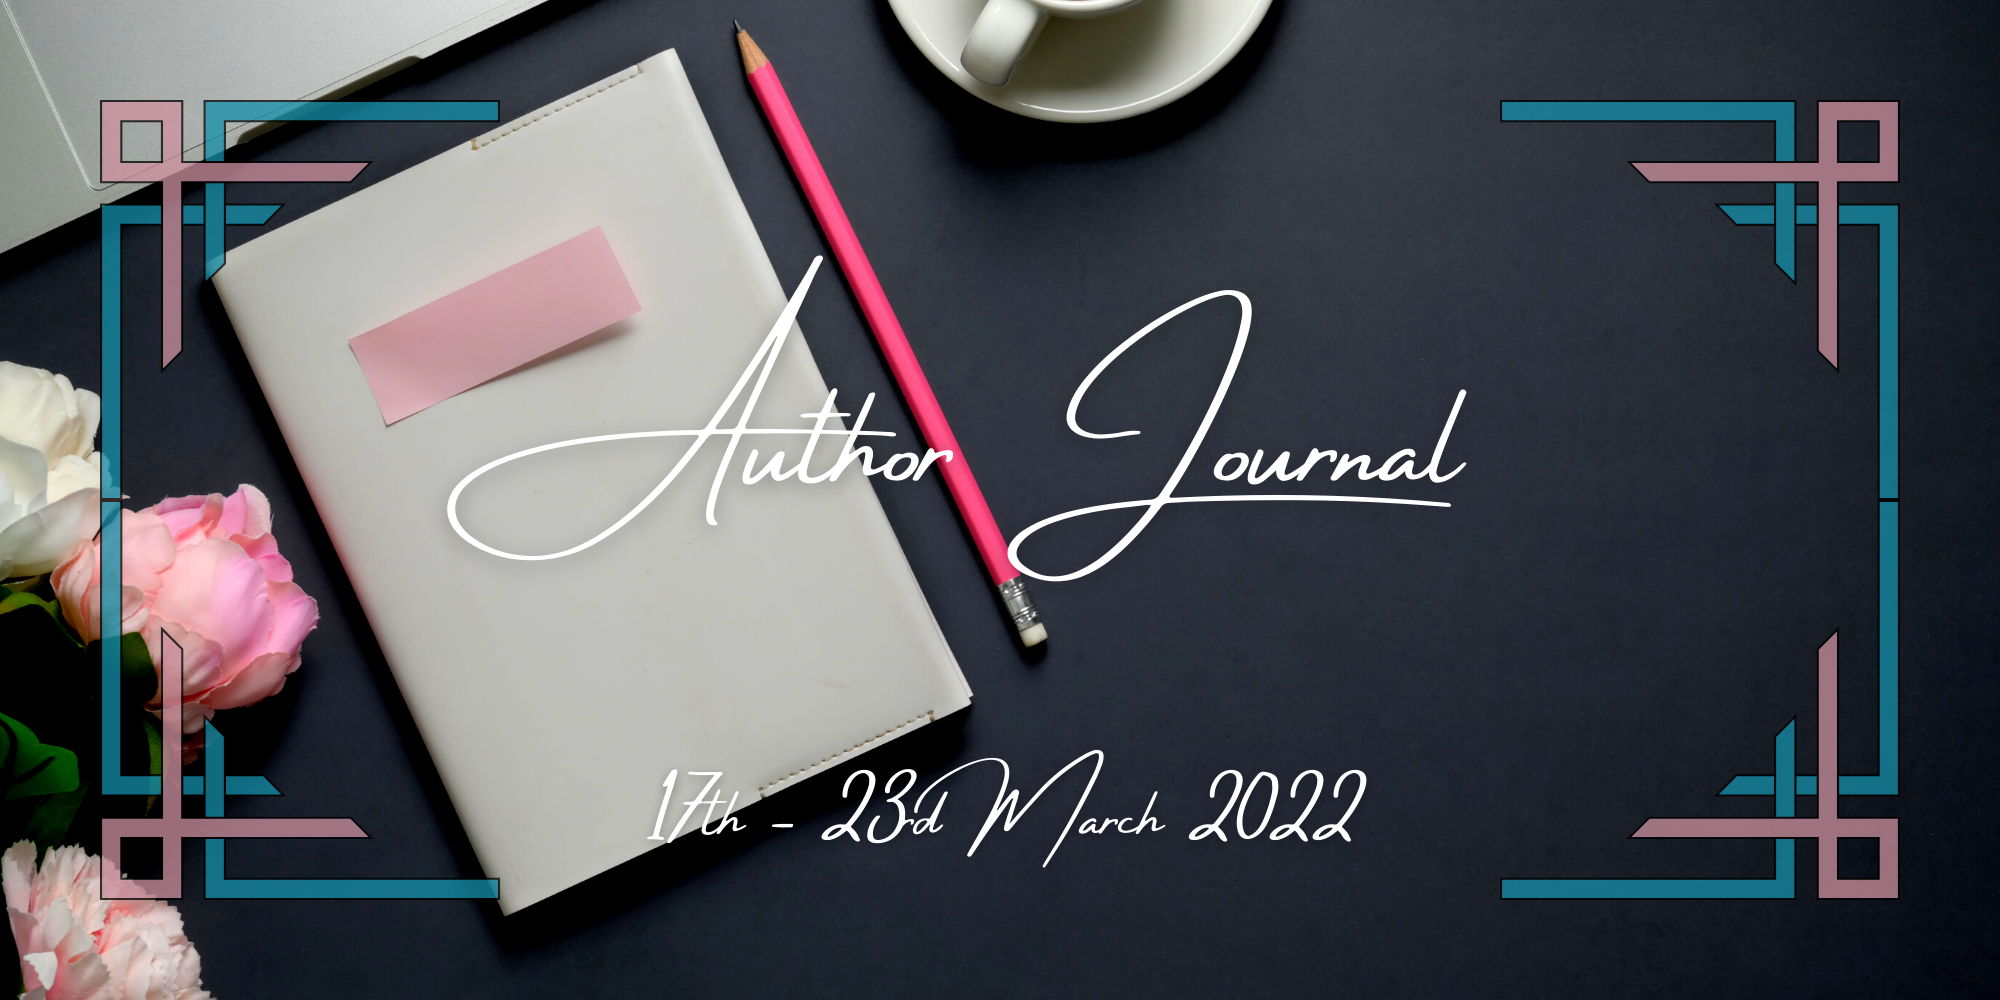 Author Journal 17th – 23rd March  2022